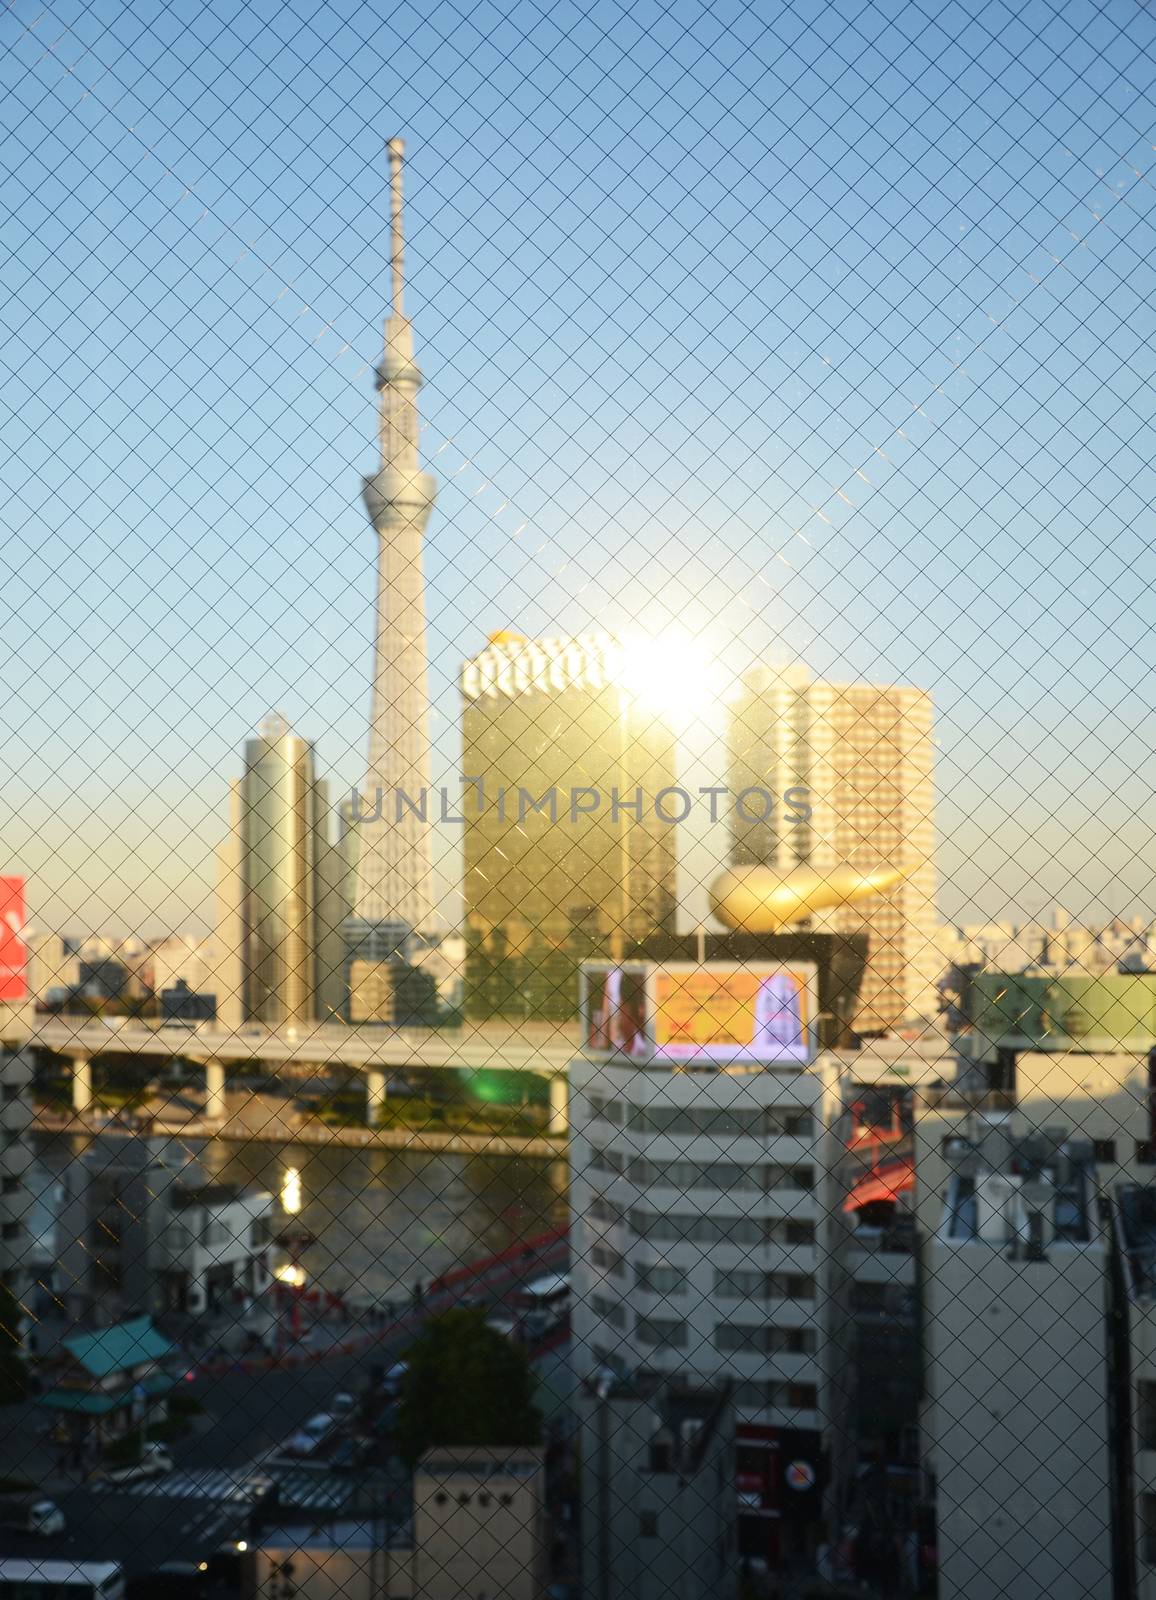 Tokyo Sky tree building at sunset through wired glass in Tokyo, Japan. Blurred background